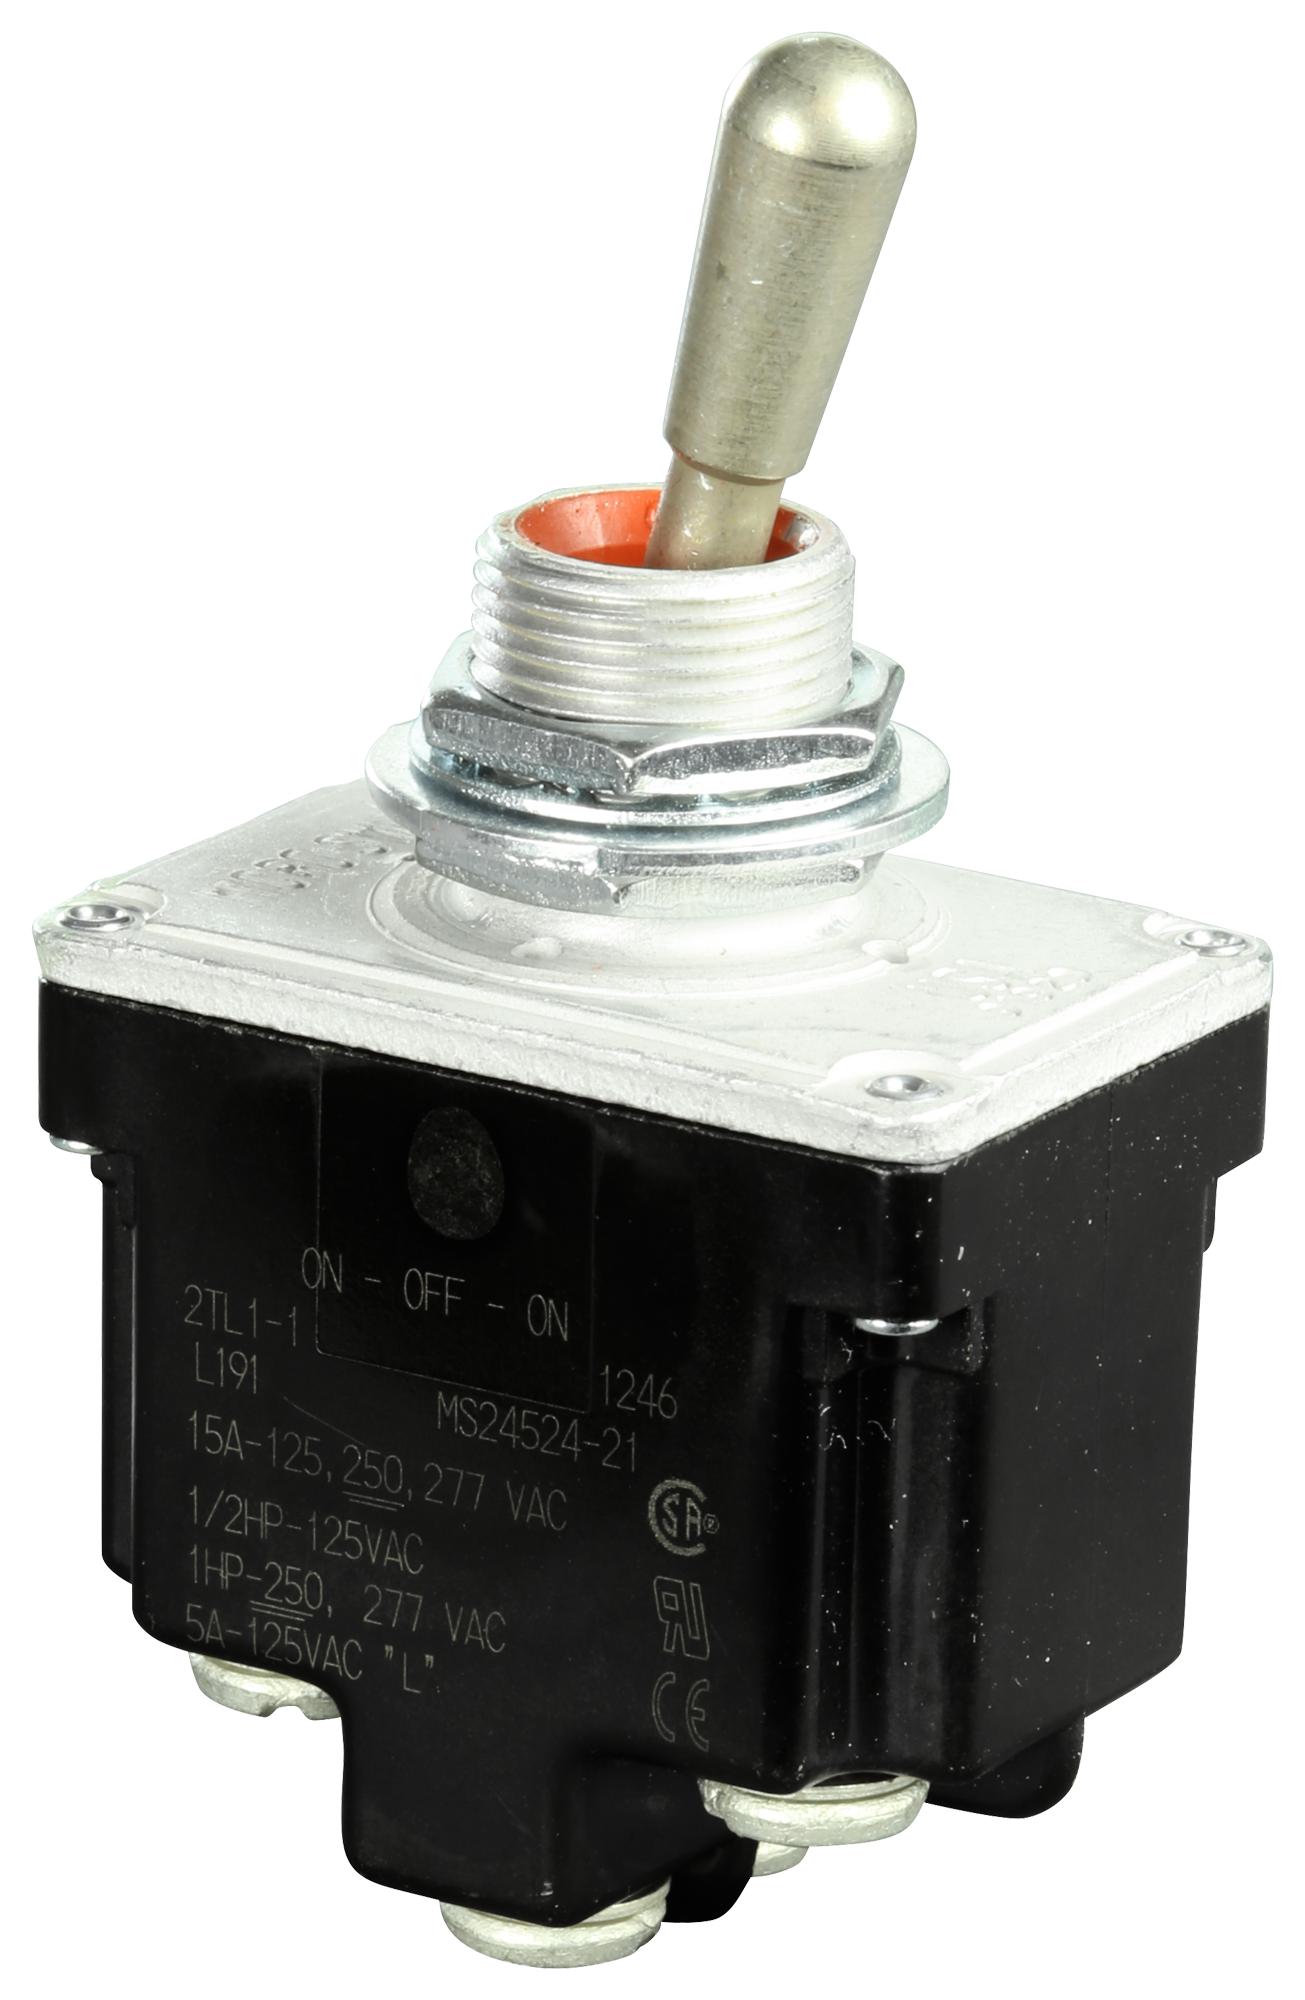 2TL1-1 TOGGLE SWITCH, DTDT HONEYWELL